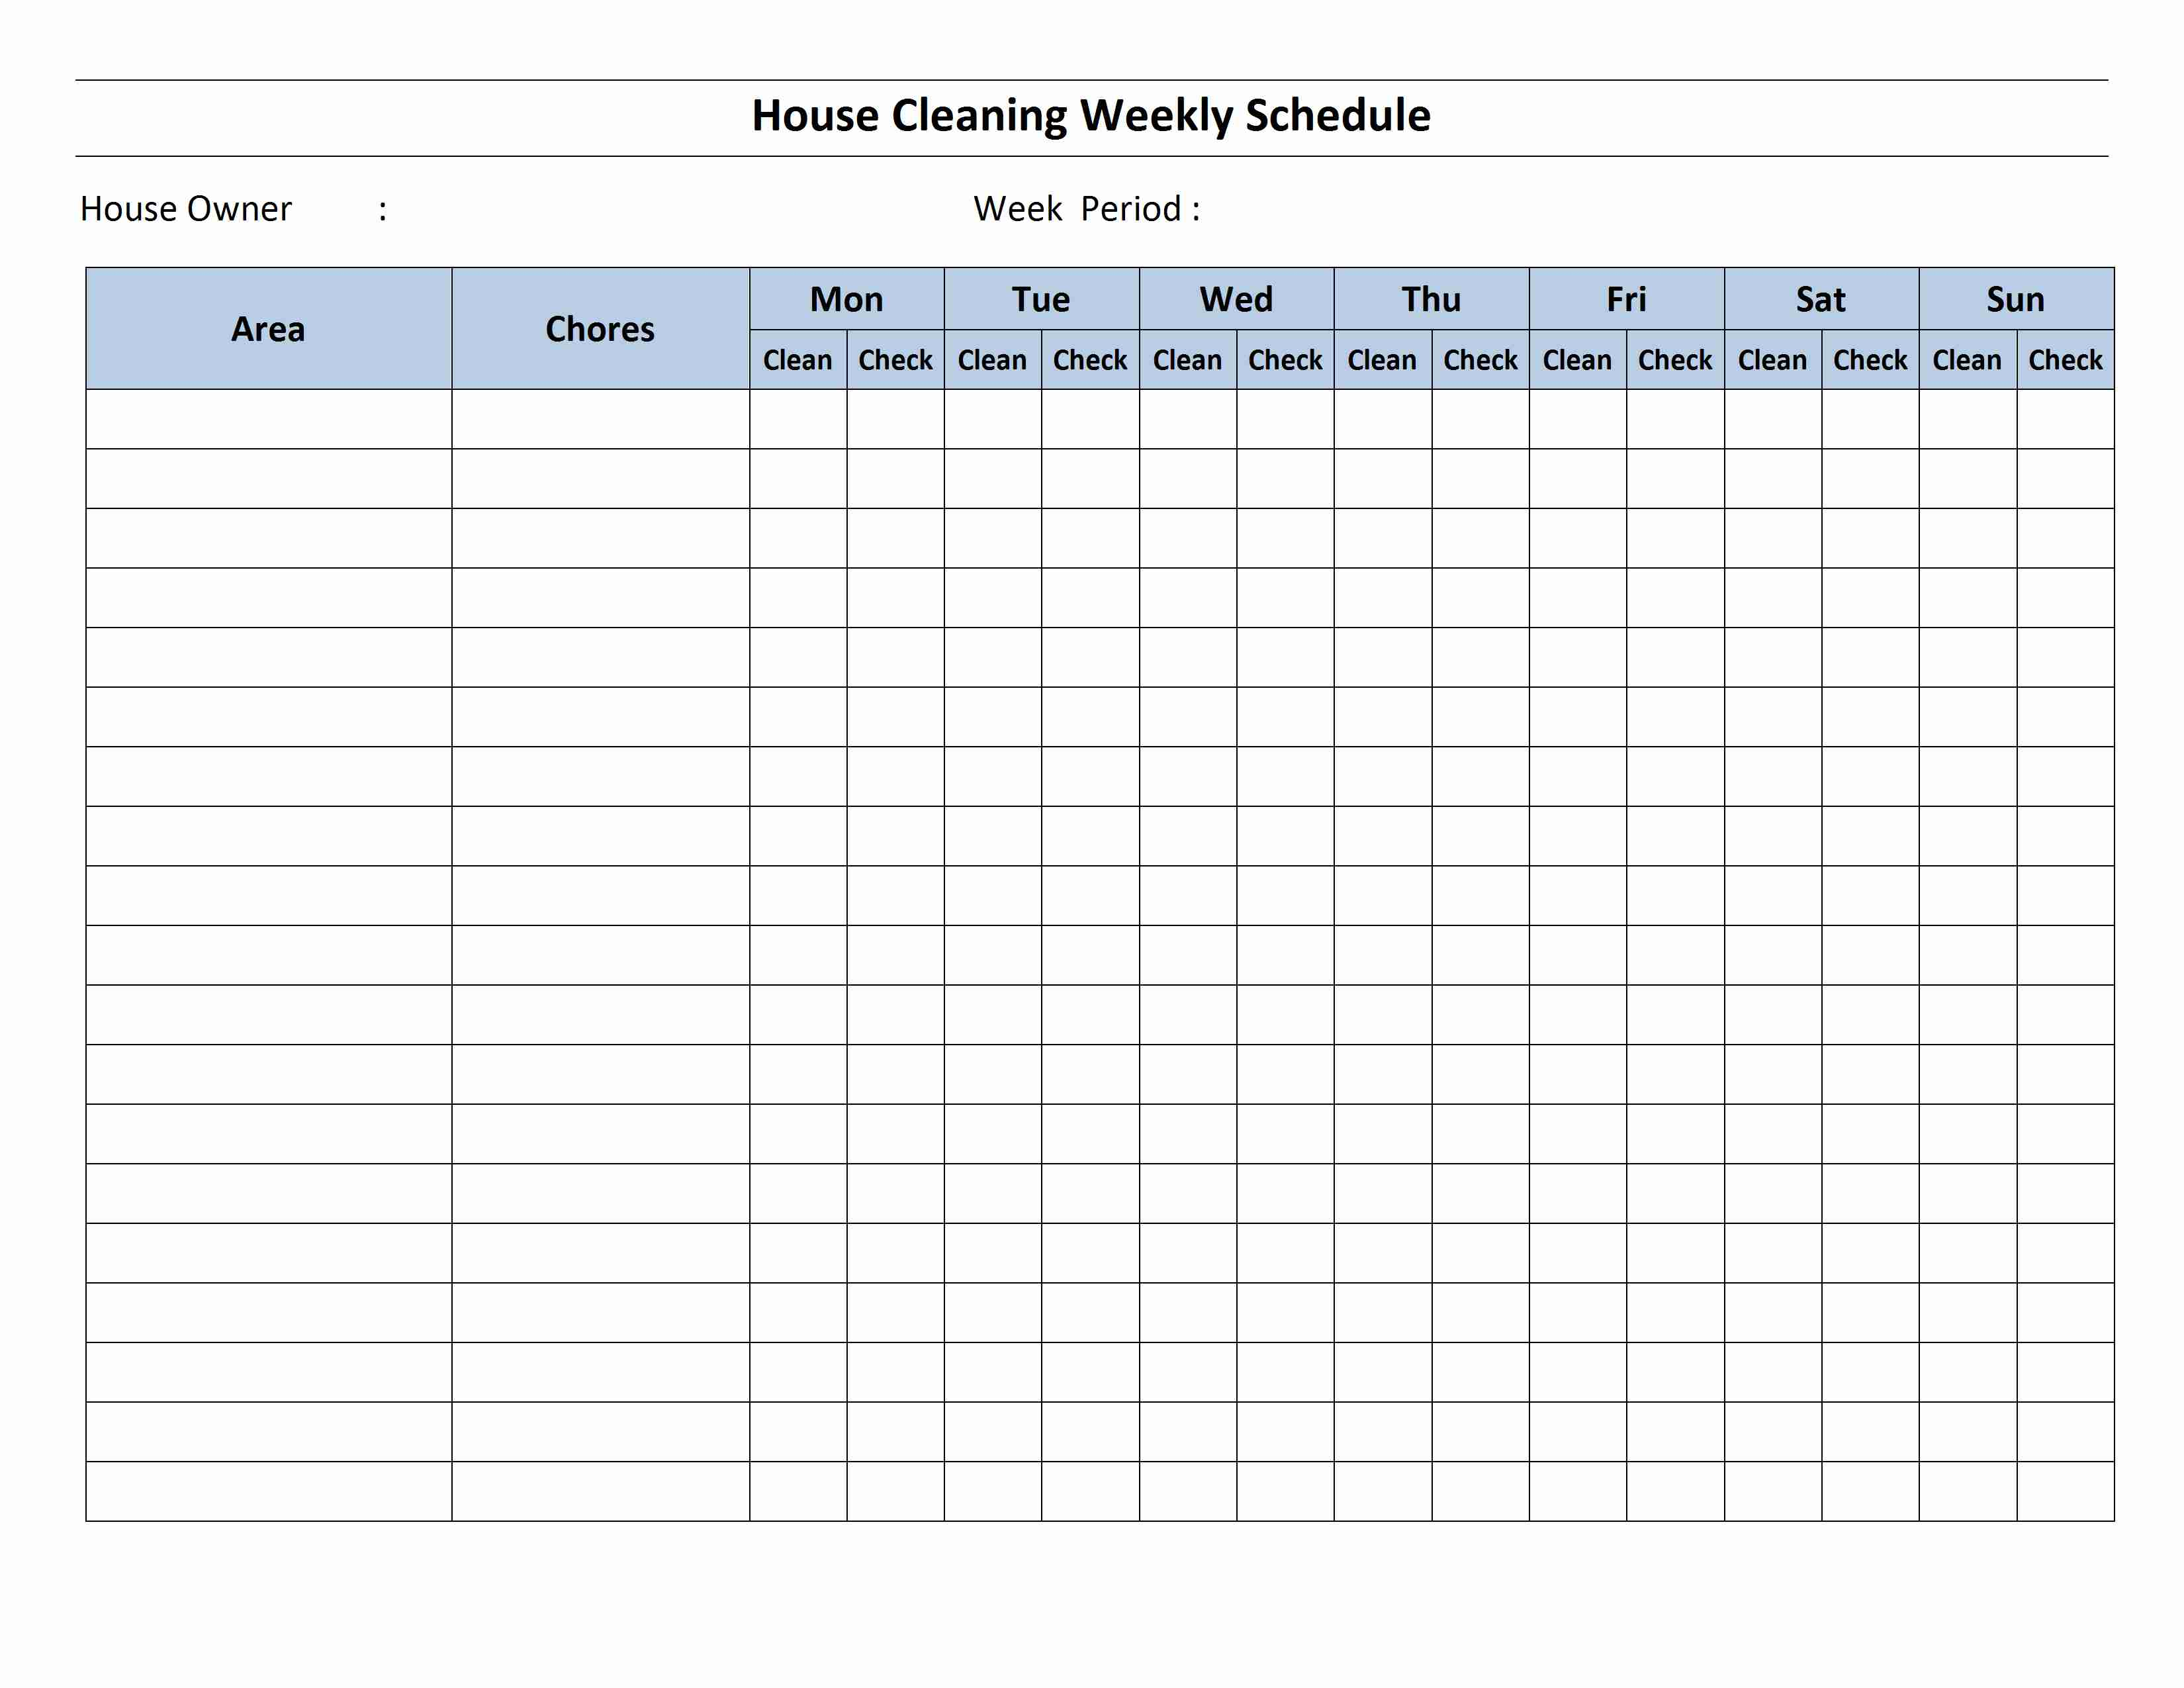 House Cleaning Schedule Template inside Employee Weekly Schedule Template Free